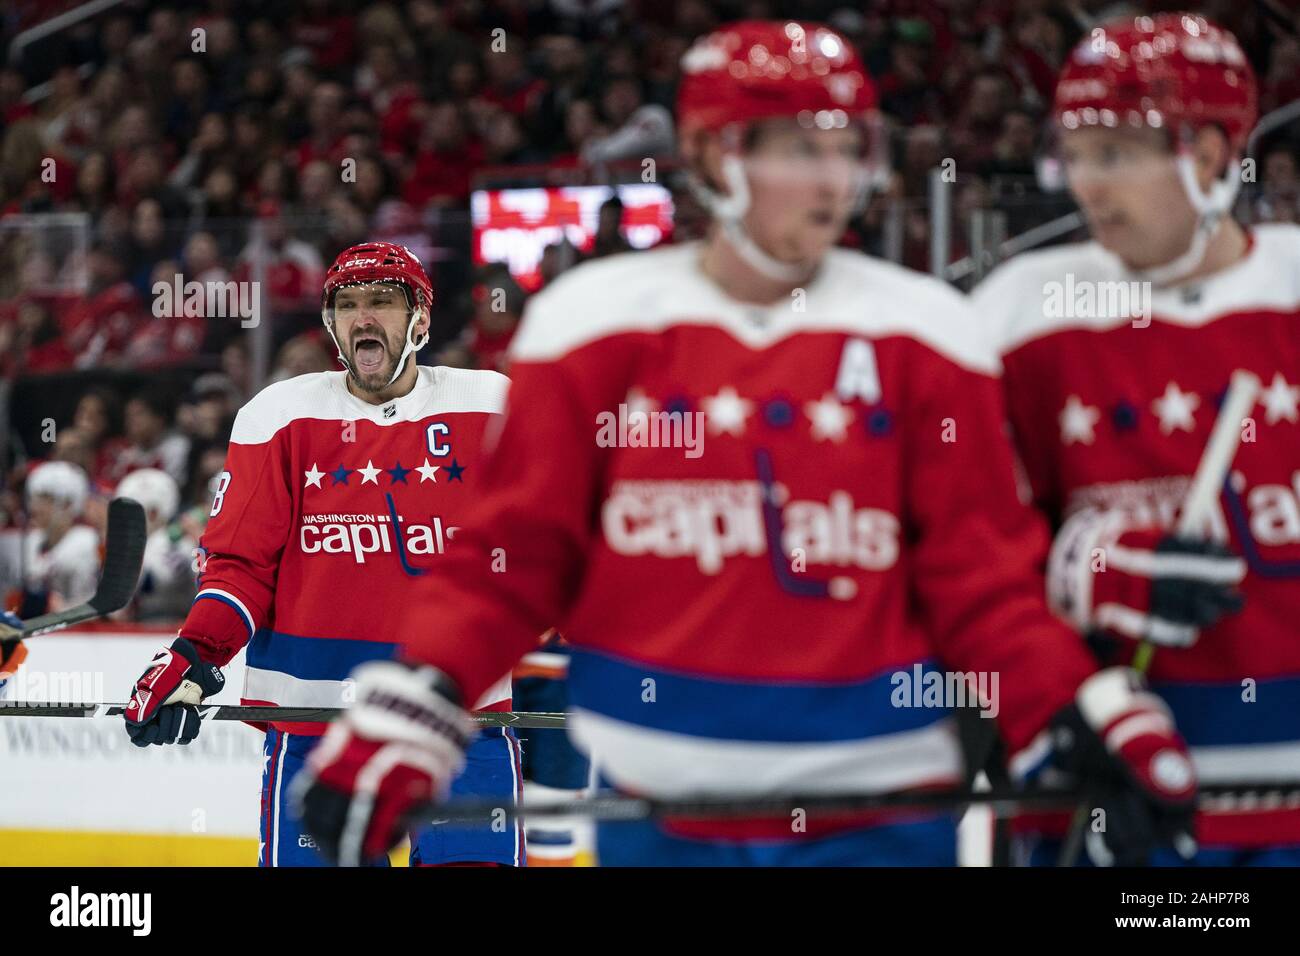 Washington, United States. 31st Dec, 2019. Washington Capitals left wing Alex Ovechkin (8) skates after a stoppage in play during the second period as the Capitals play the New York Islanders at Capital One Arena in Washington, DC on Tuesday, December 31, 2019. The Washington Capitals finish the decade as the winningest team in the NHL with 465 wins since 2010. Photo by Alex Edelman/UPI Credit: UPI/Alamy Live News Stock Photo